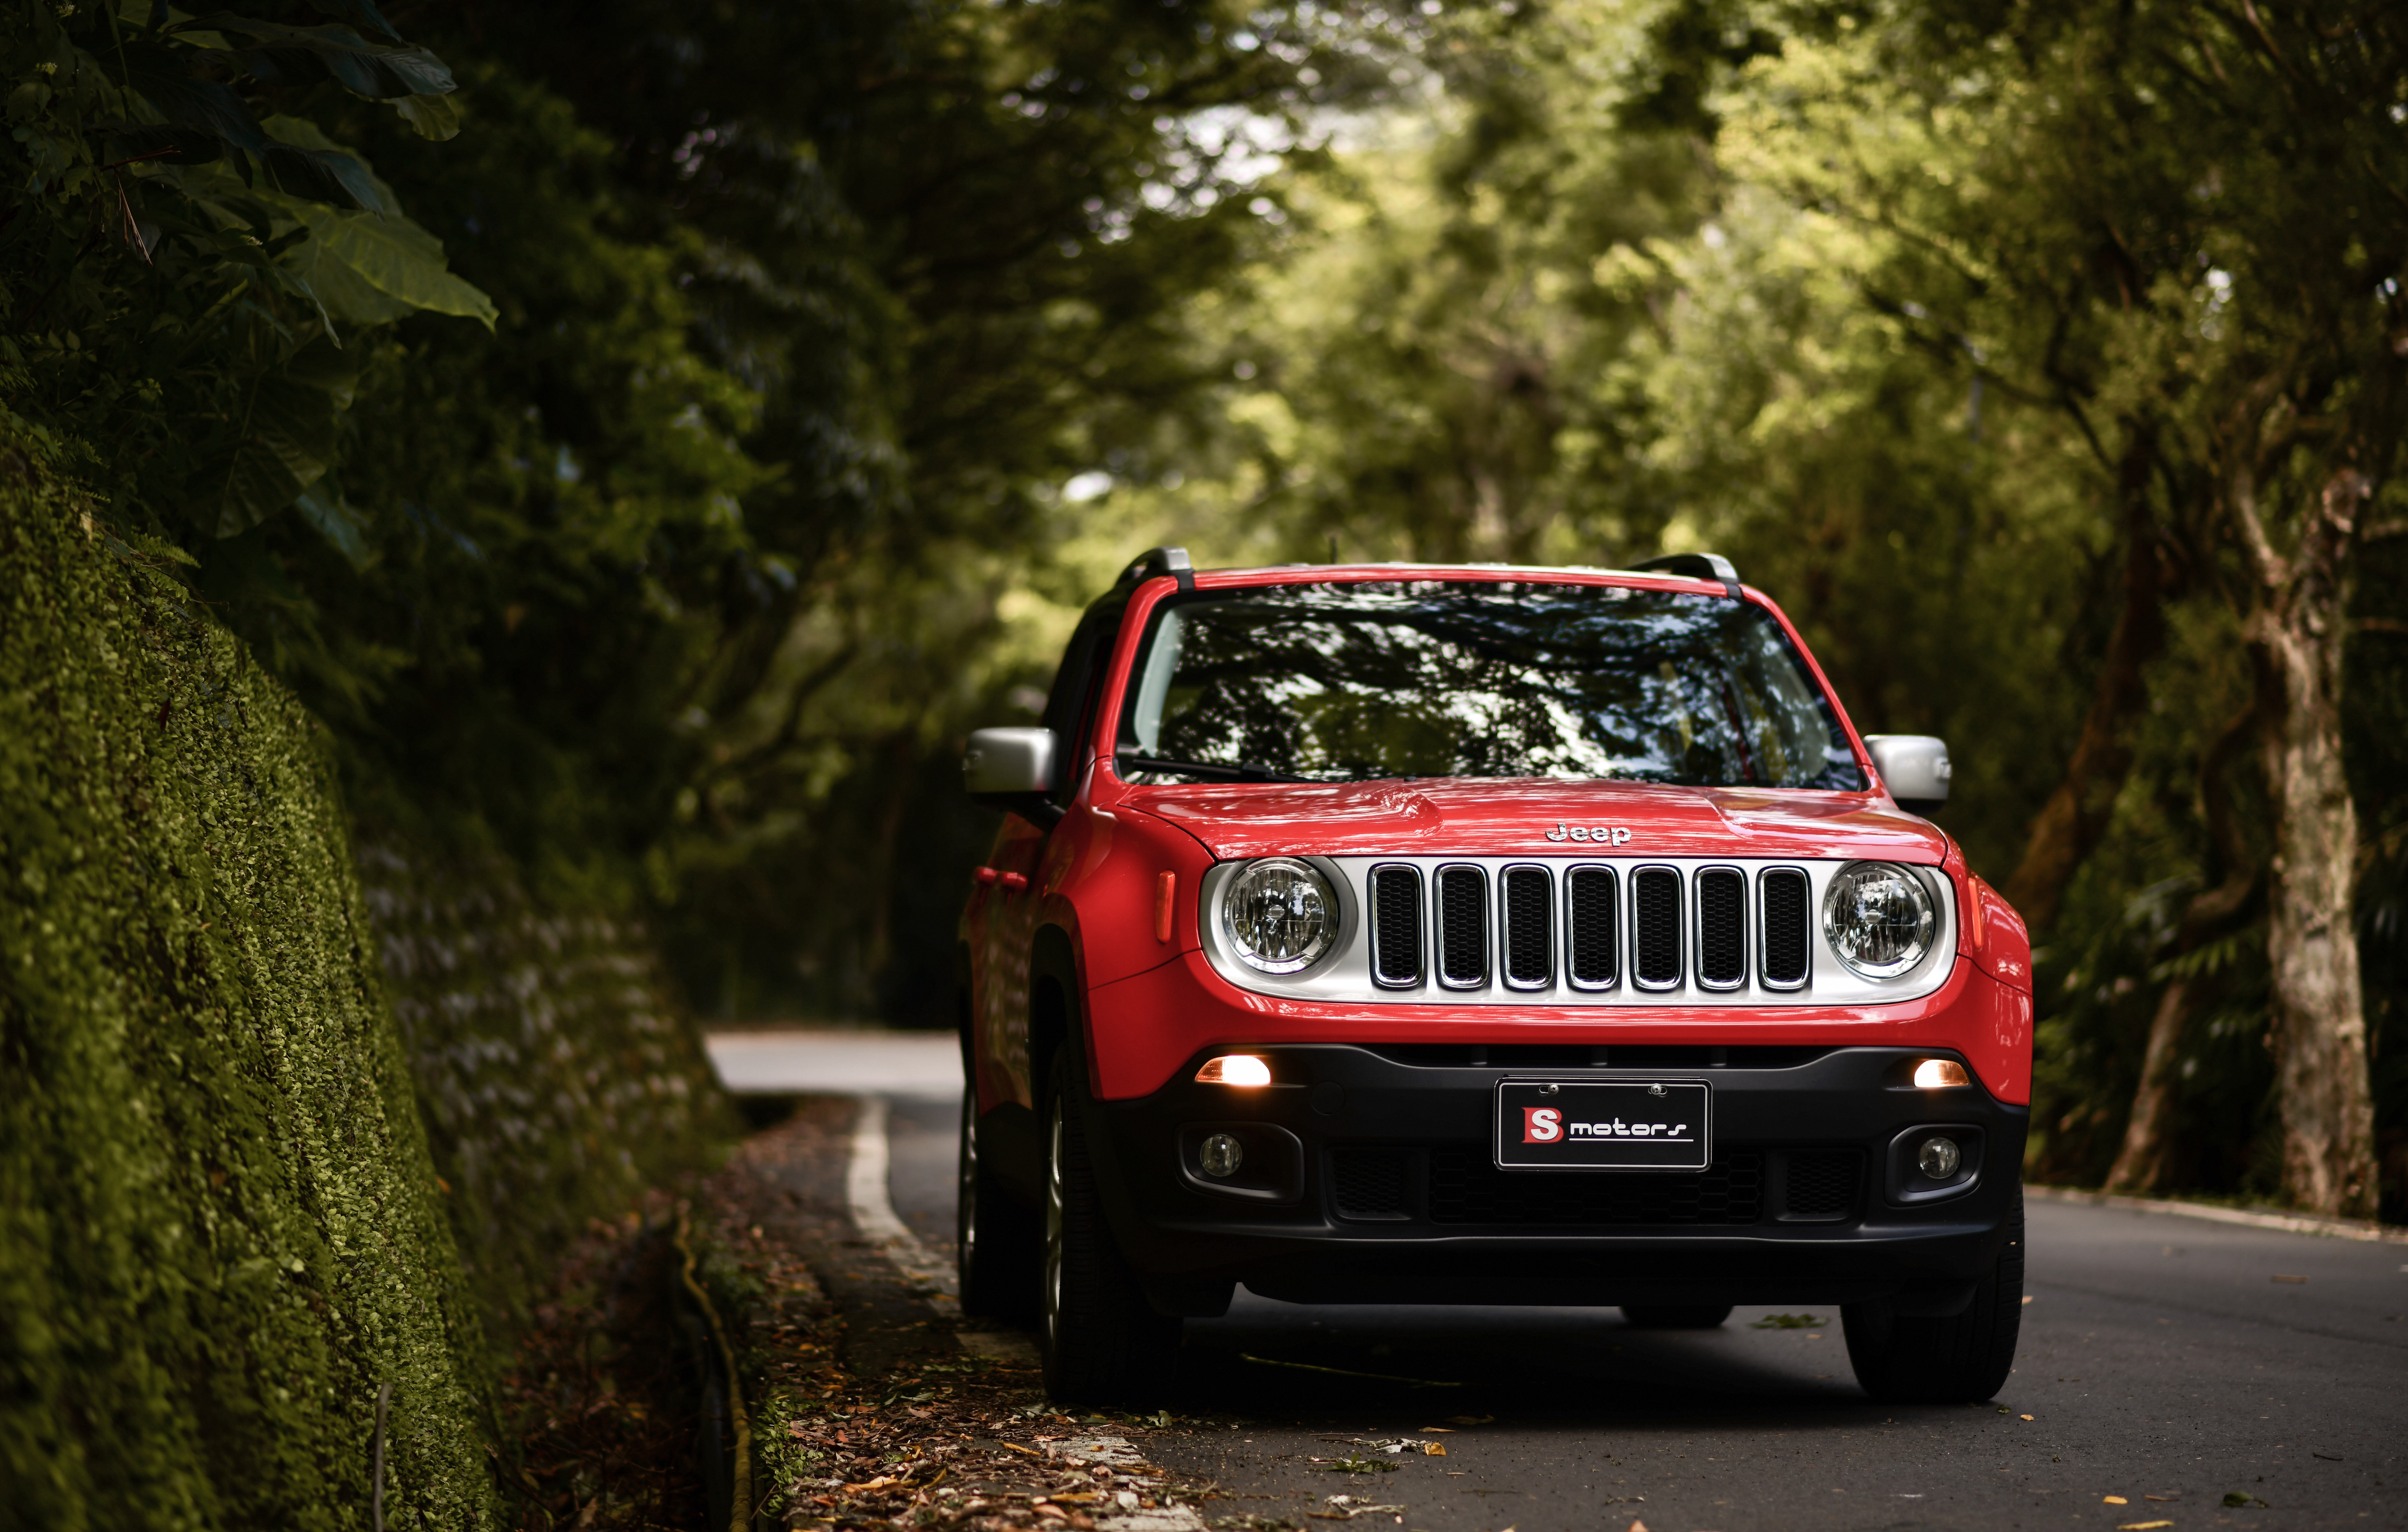 jeep, suv, cars, front view, red, car, machine, jeep renegade 1080p